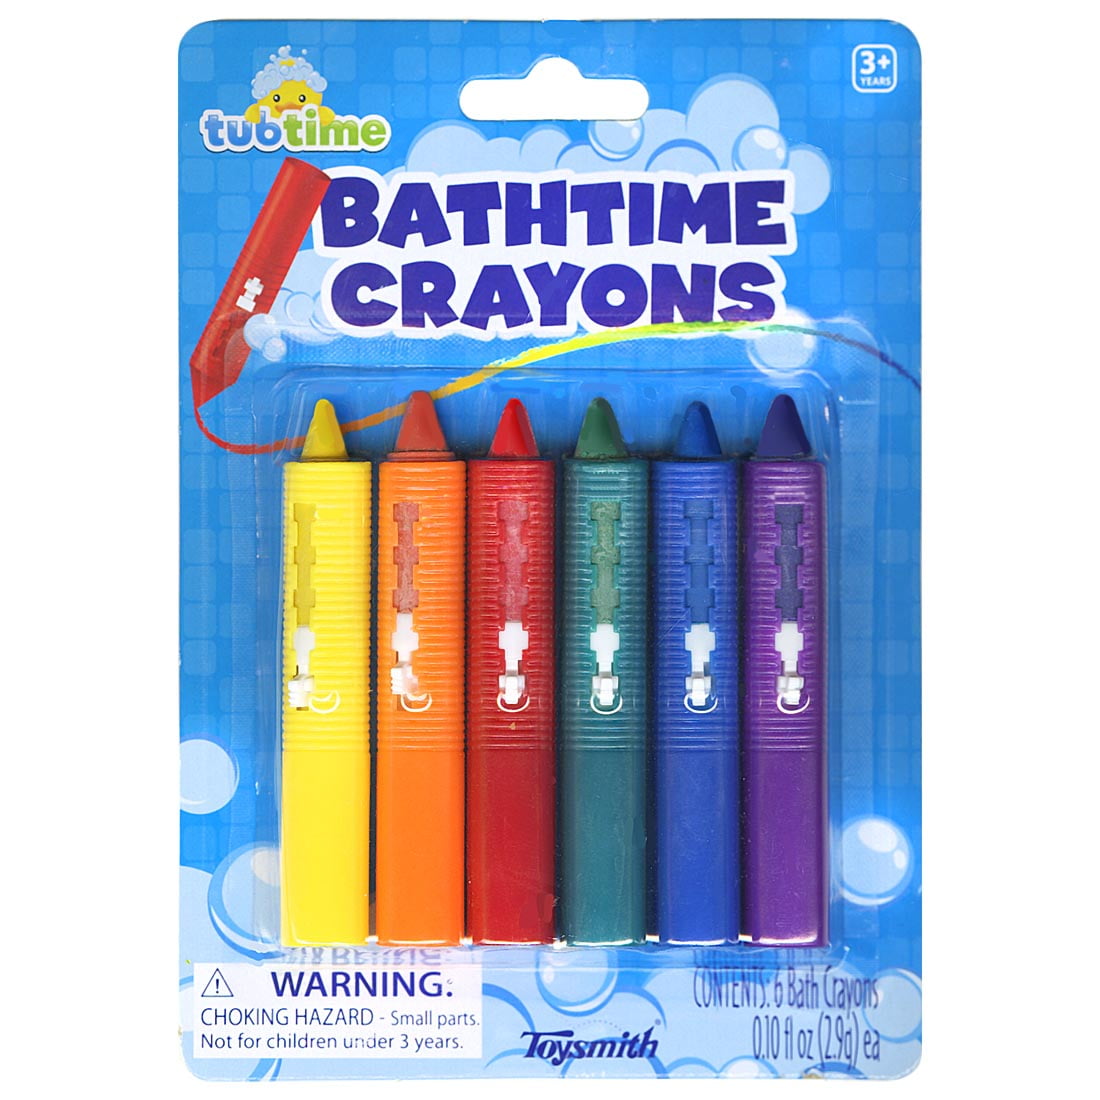 Honeysticks Bath Crayons for Toddlers & Kids - Handmade from Natural  Beeswax for Non Toxic Bathtub Fun - Fragrance Free, Non-Irritating Toys -  Bright